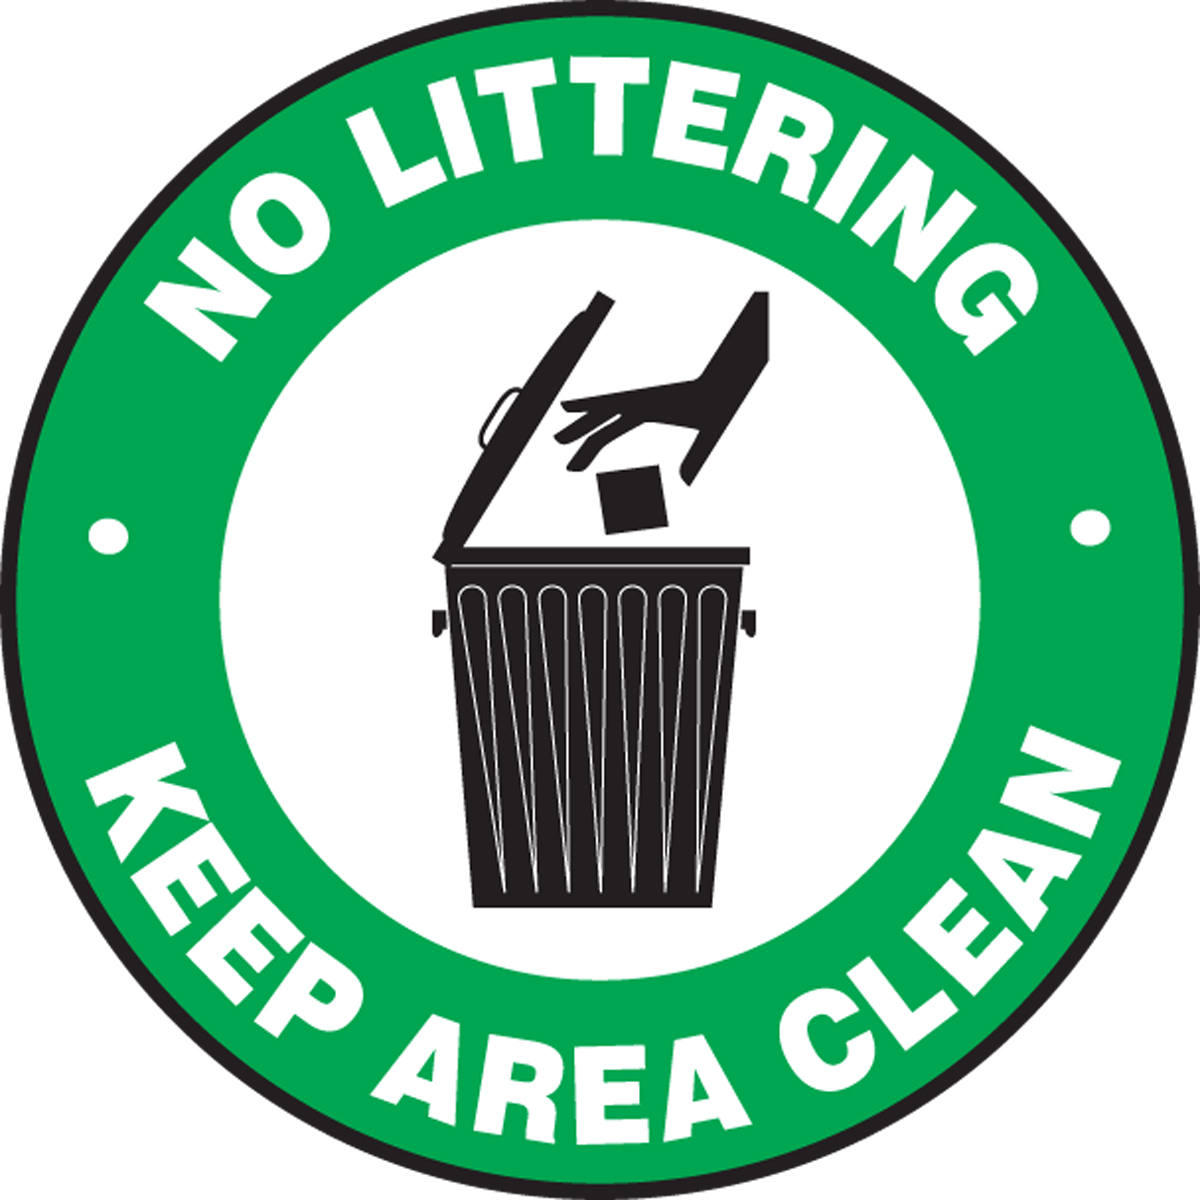 pavement-print-sign-no-littering-keep-area-clean-psw726